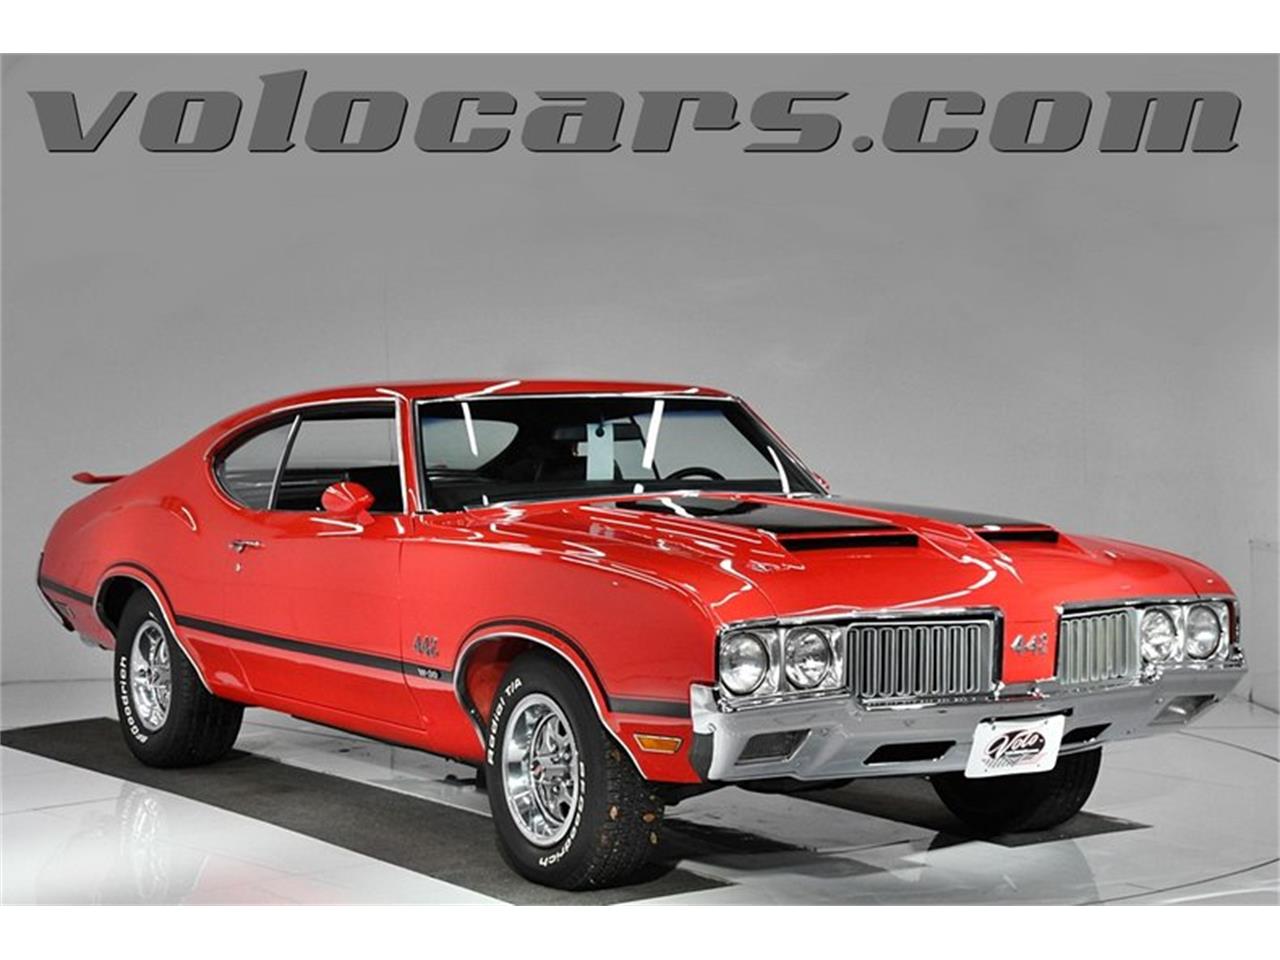 Auto Parts Accessories 1970 Oldsmobile Cutlass 442 Muslce Vinyl Decal Your Color Choice Sticker Car Truck Parts Car Truck Graphics Decals